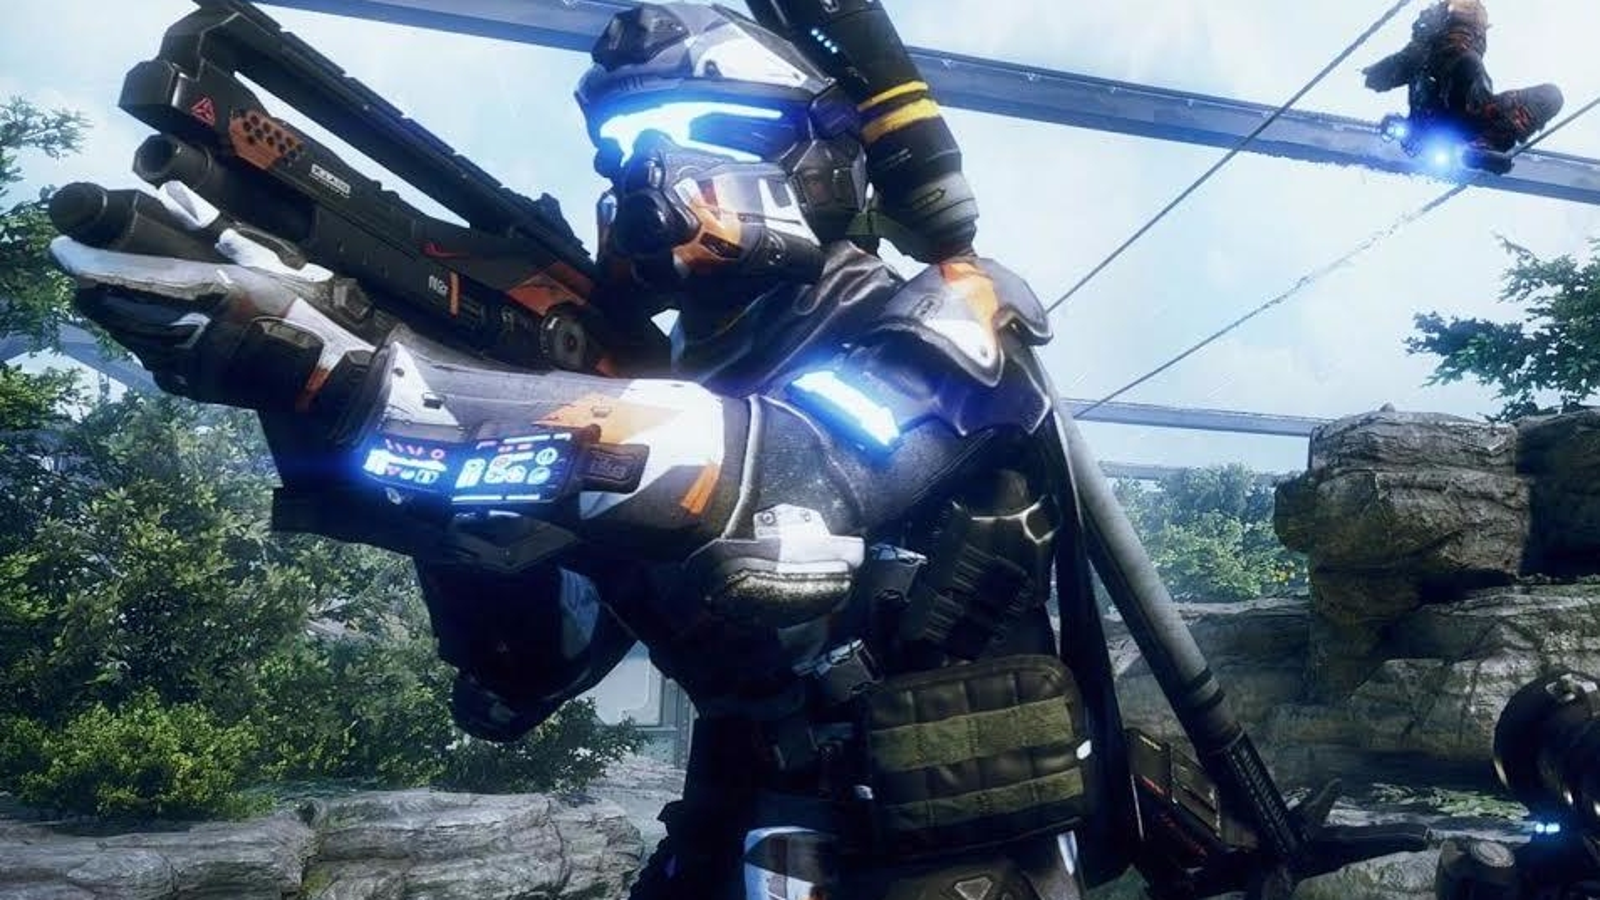 Titanfall 2 is getting a new pilot-only multiplayer mode